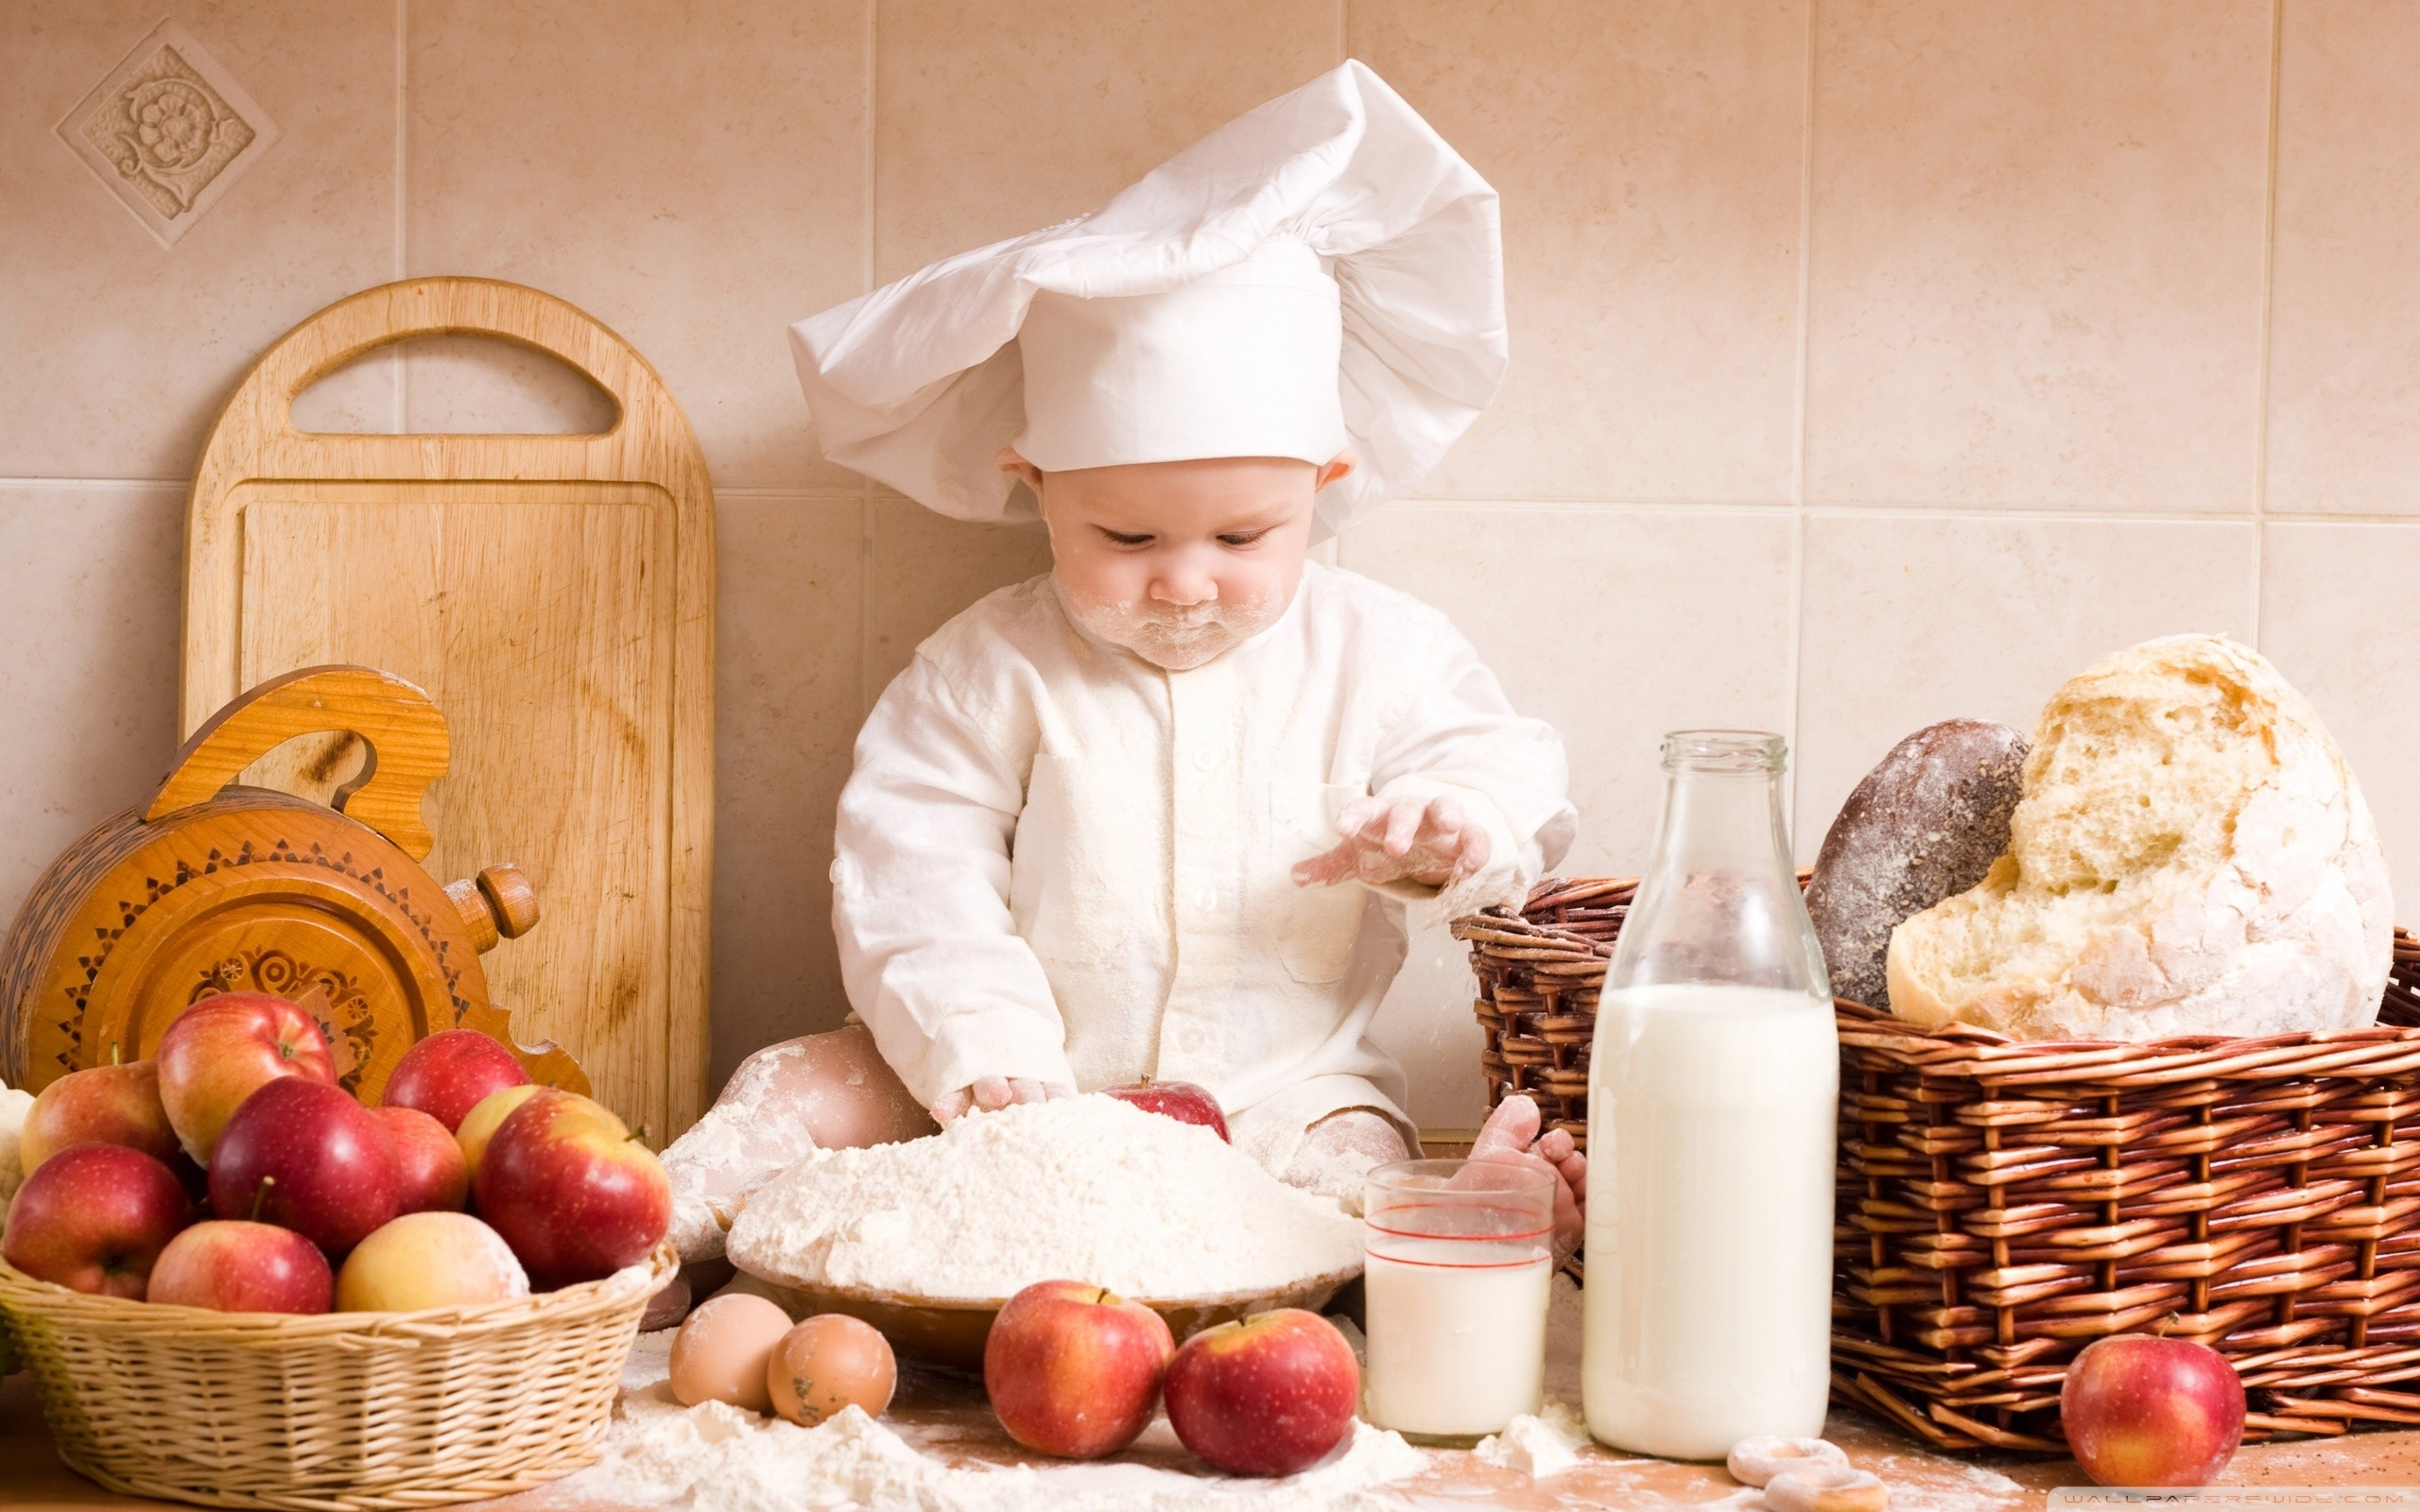 Baby Chef - Baby Chef, Transparent background PNG HD thumbnail